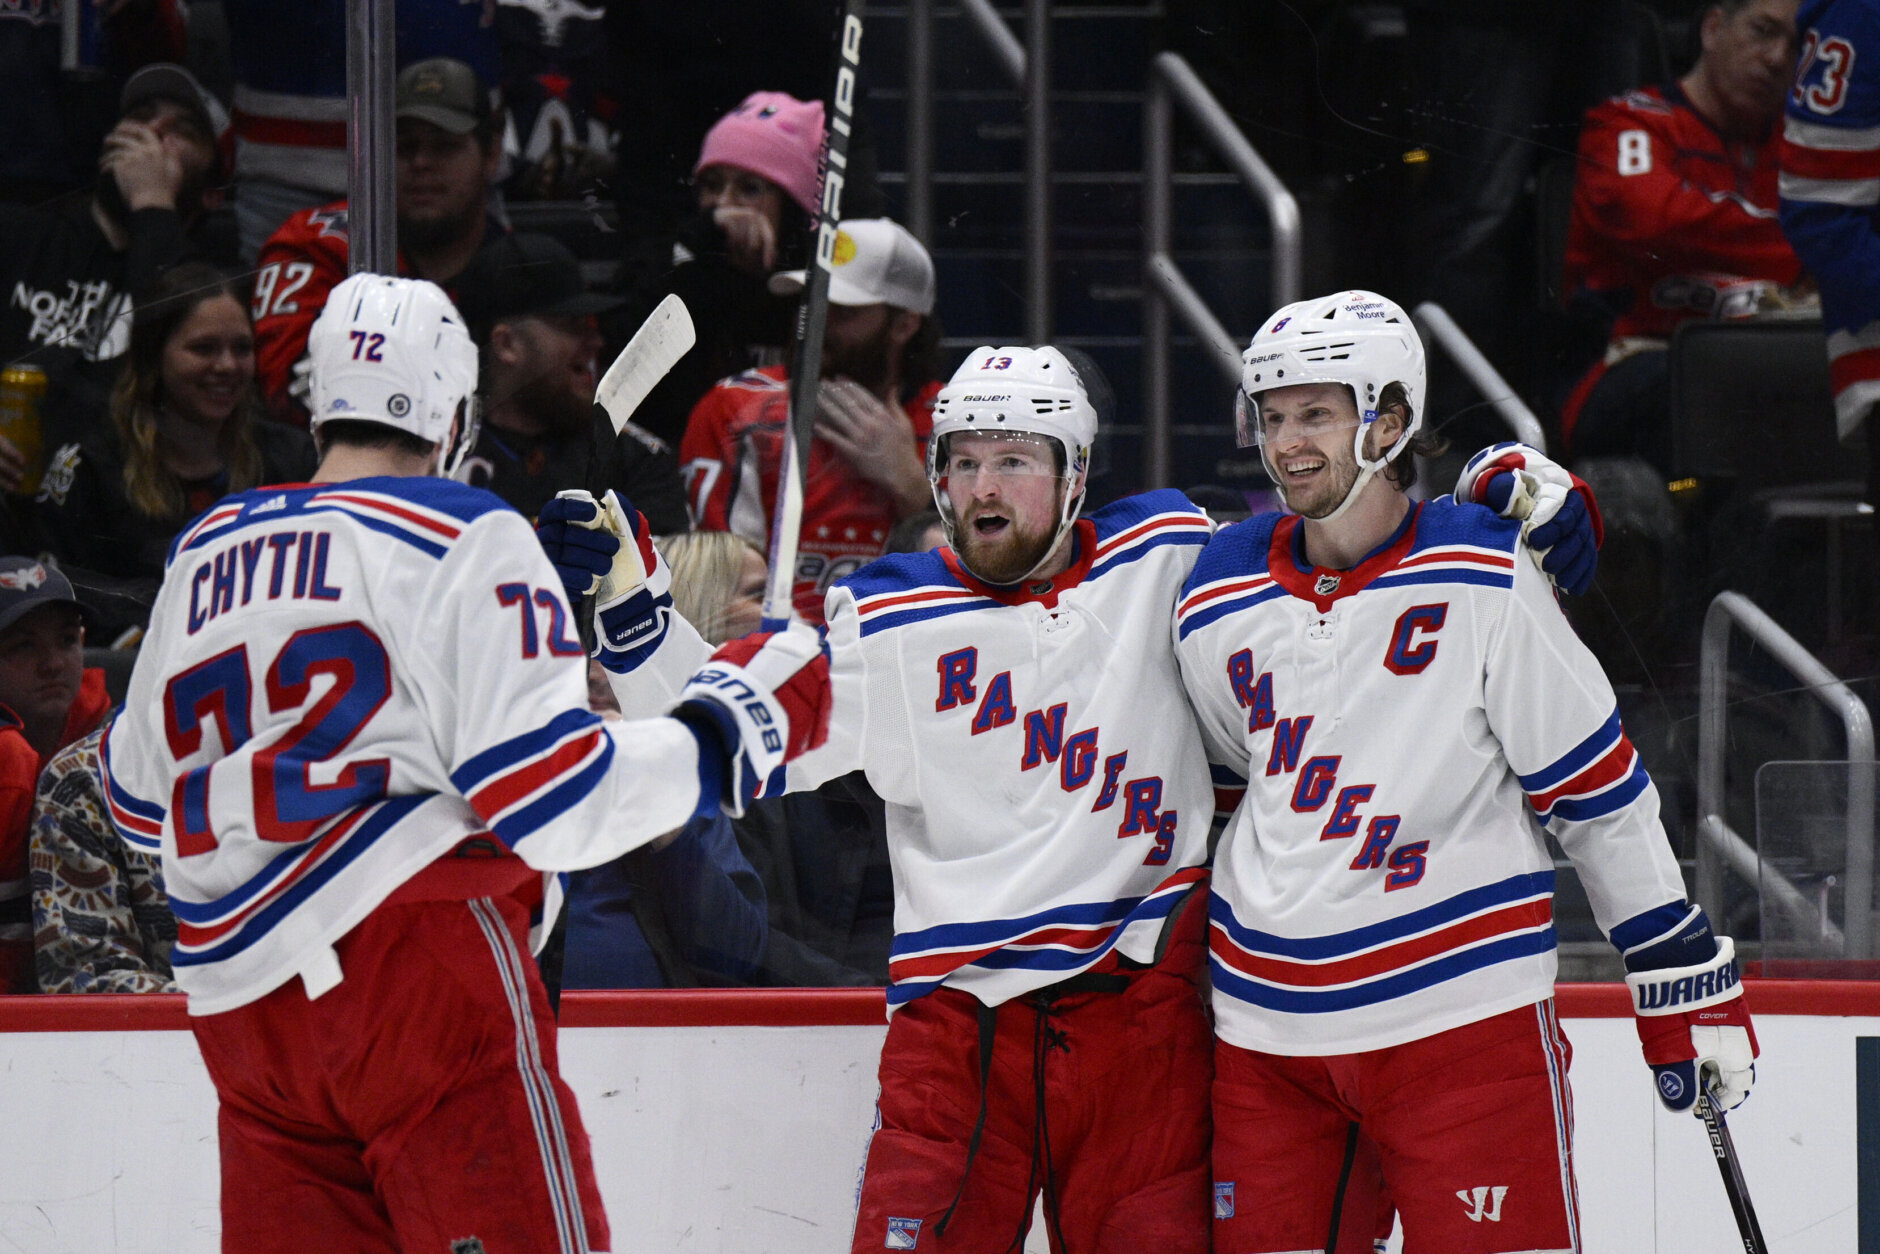 Filip Chytil's hot ride continues in Rangers' Game 1 win over